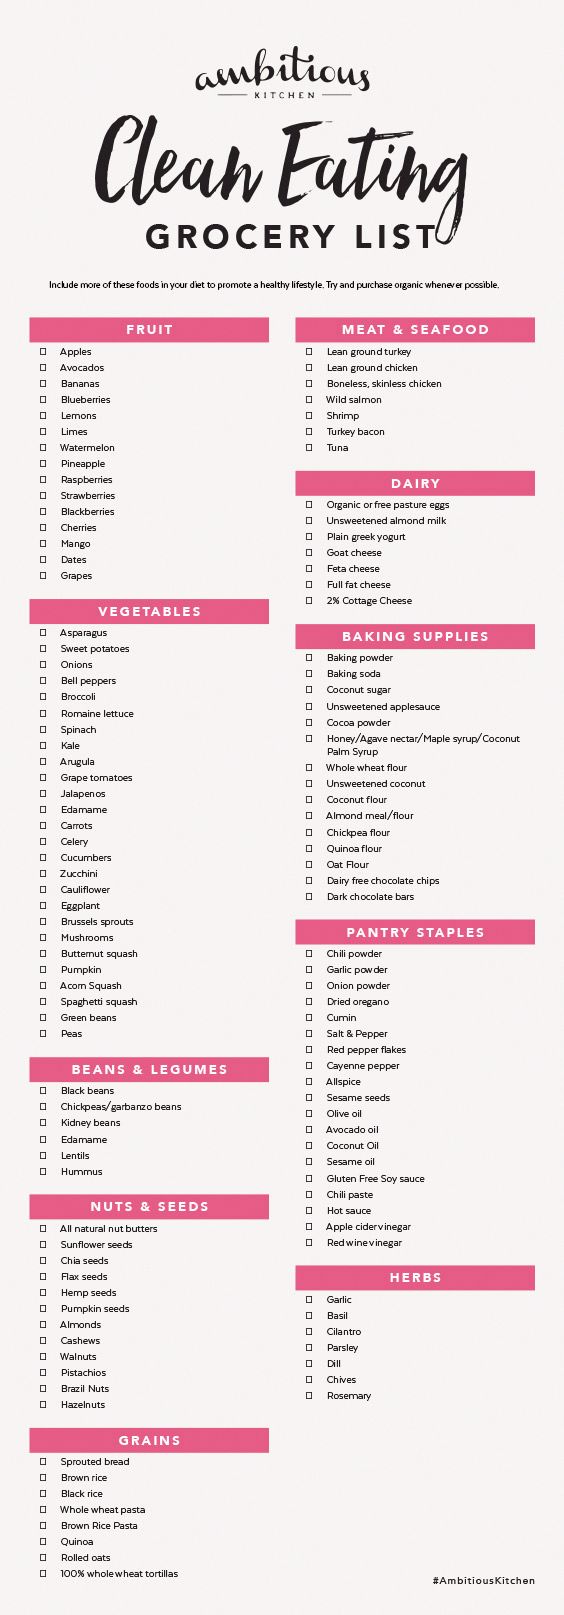 Download this FREE printable clean eating grocery list and learn about